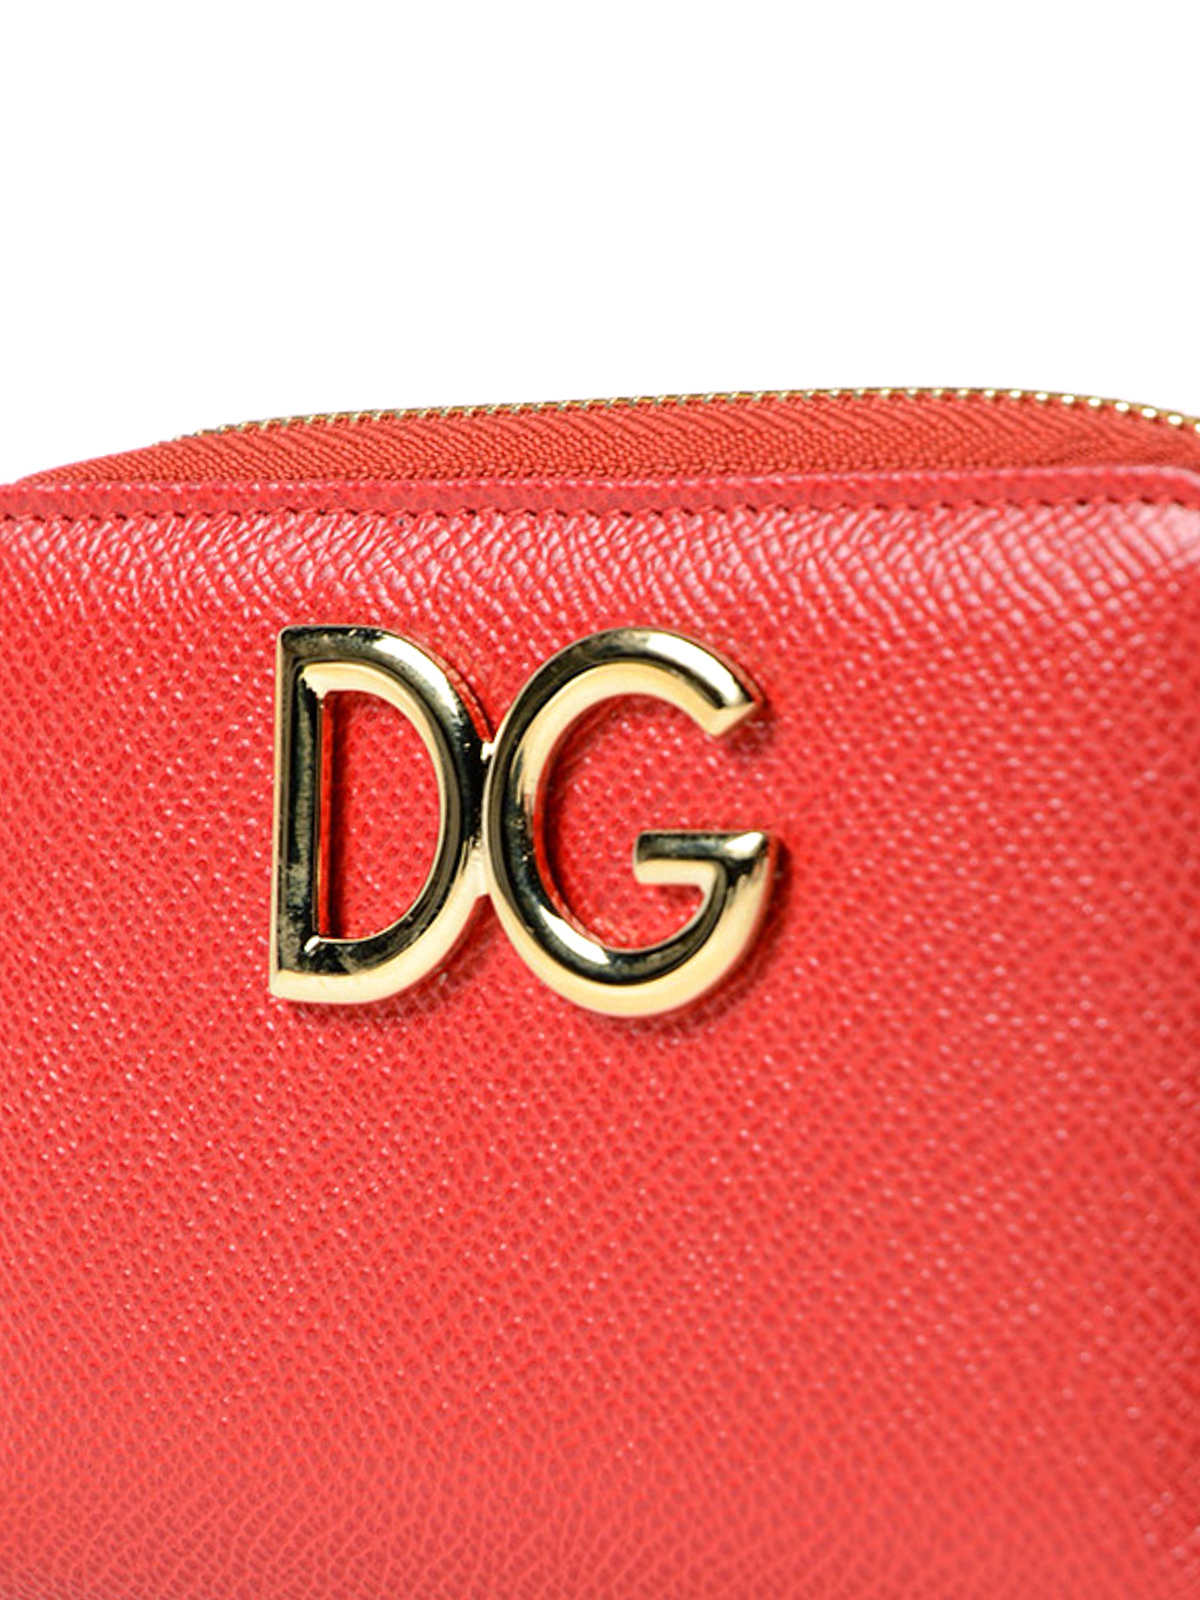 Wallets & purses Dolce & Gabbana - Dauphine leather compact wallet